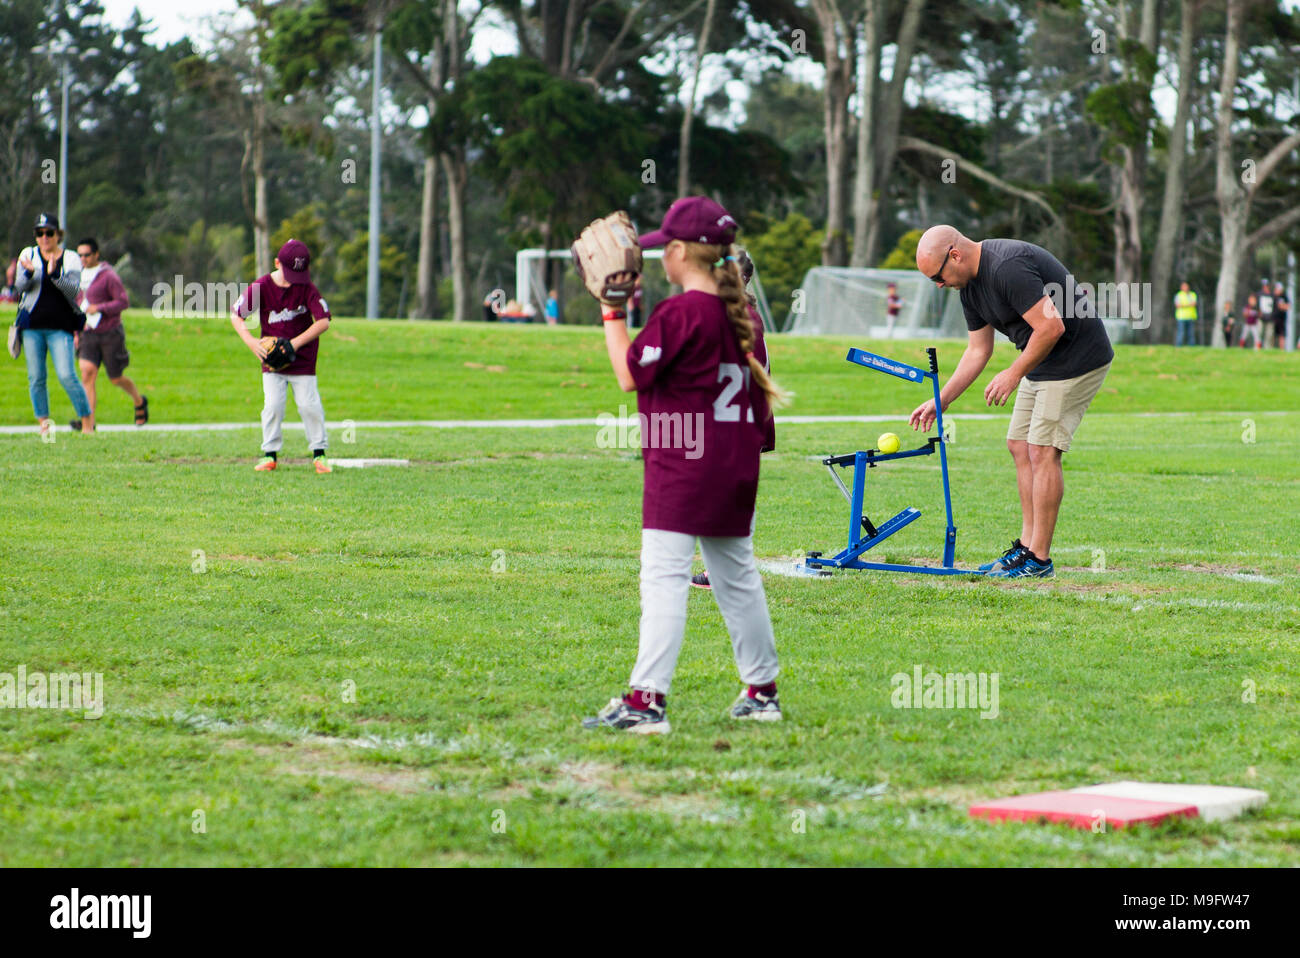 A adult uses a pitching machine following though with pitching arm action at junior softball. Stock Photo